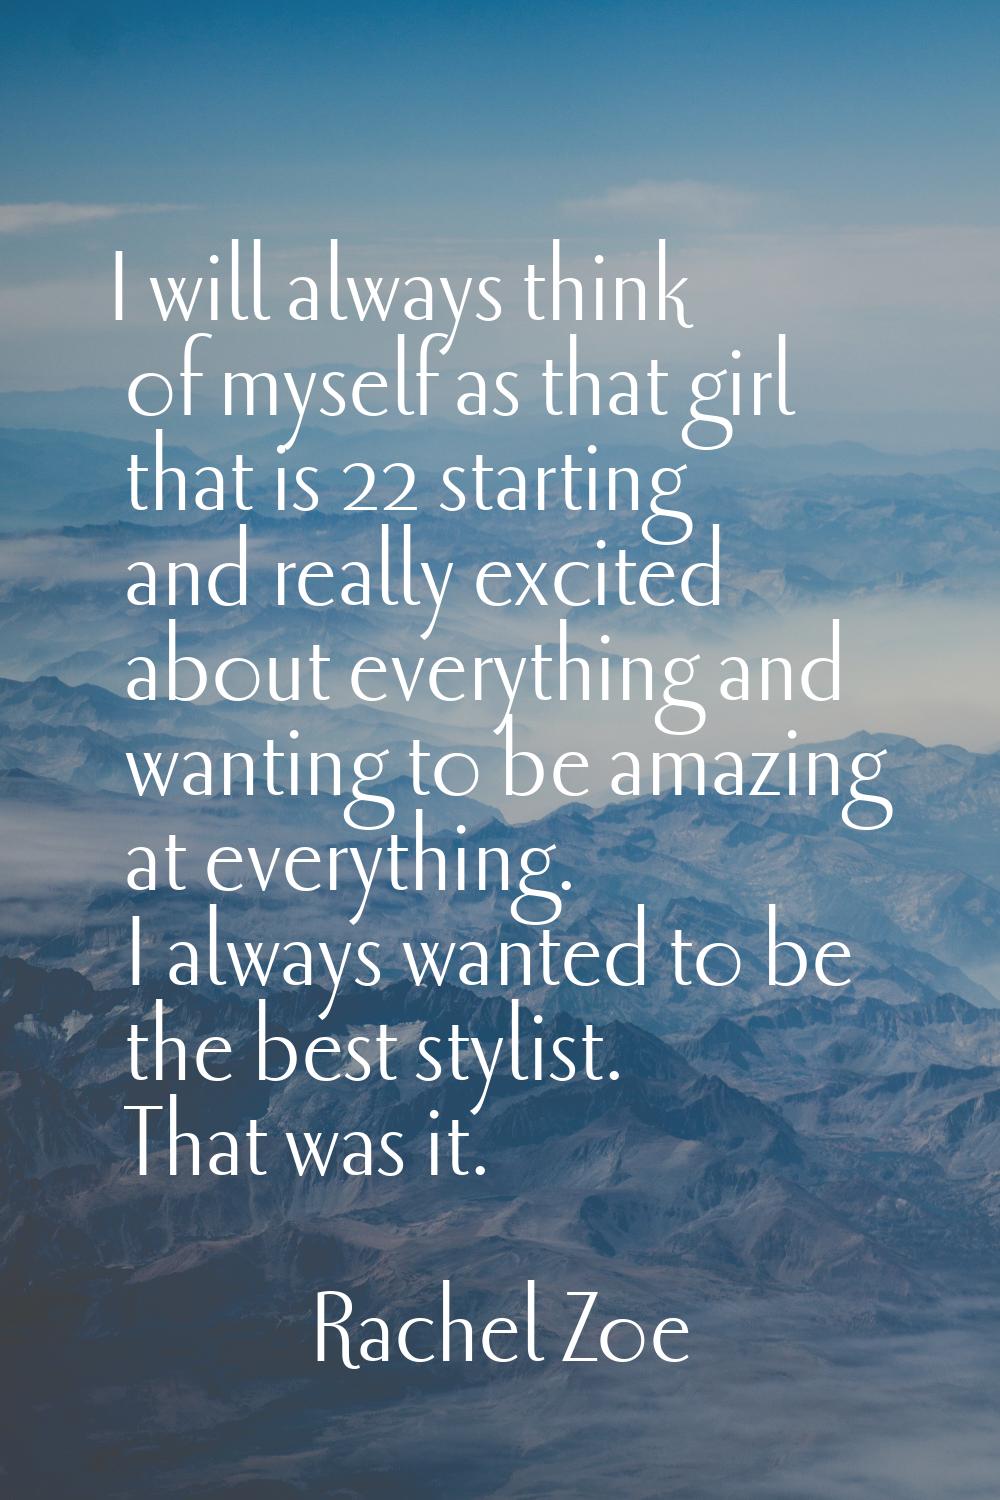 I will always think of myself as that girl that is 22 starting and really excited about everything 